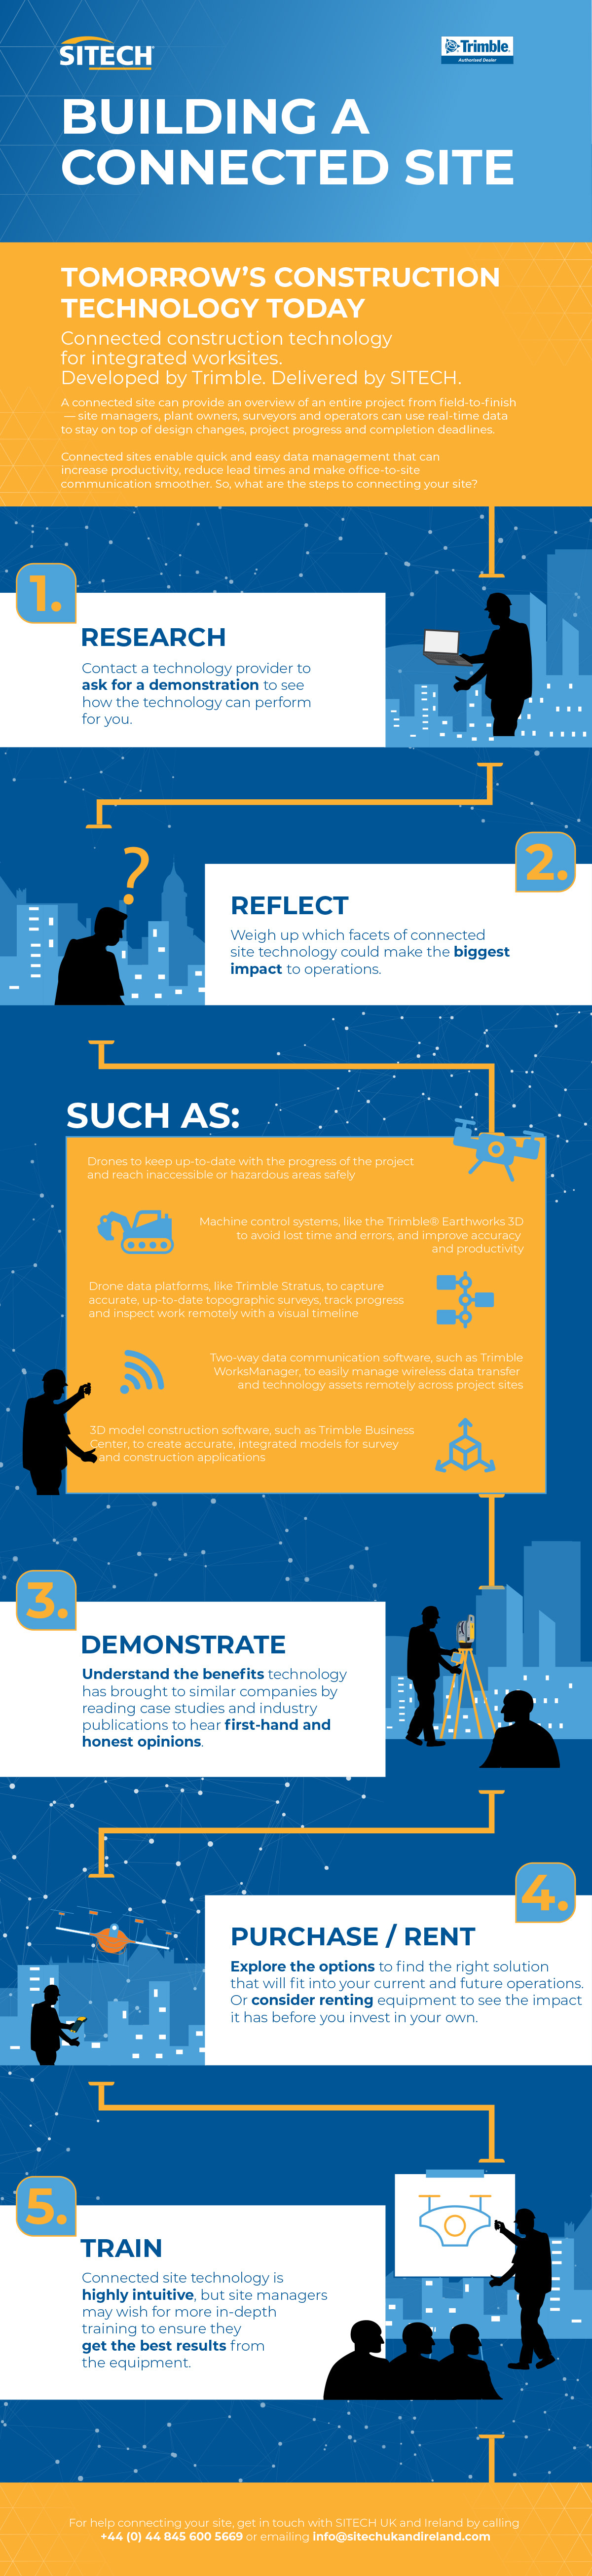 sitech-infographic-building-a-connected-site